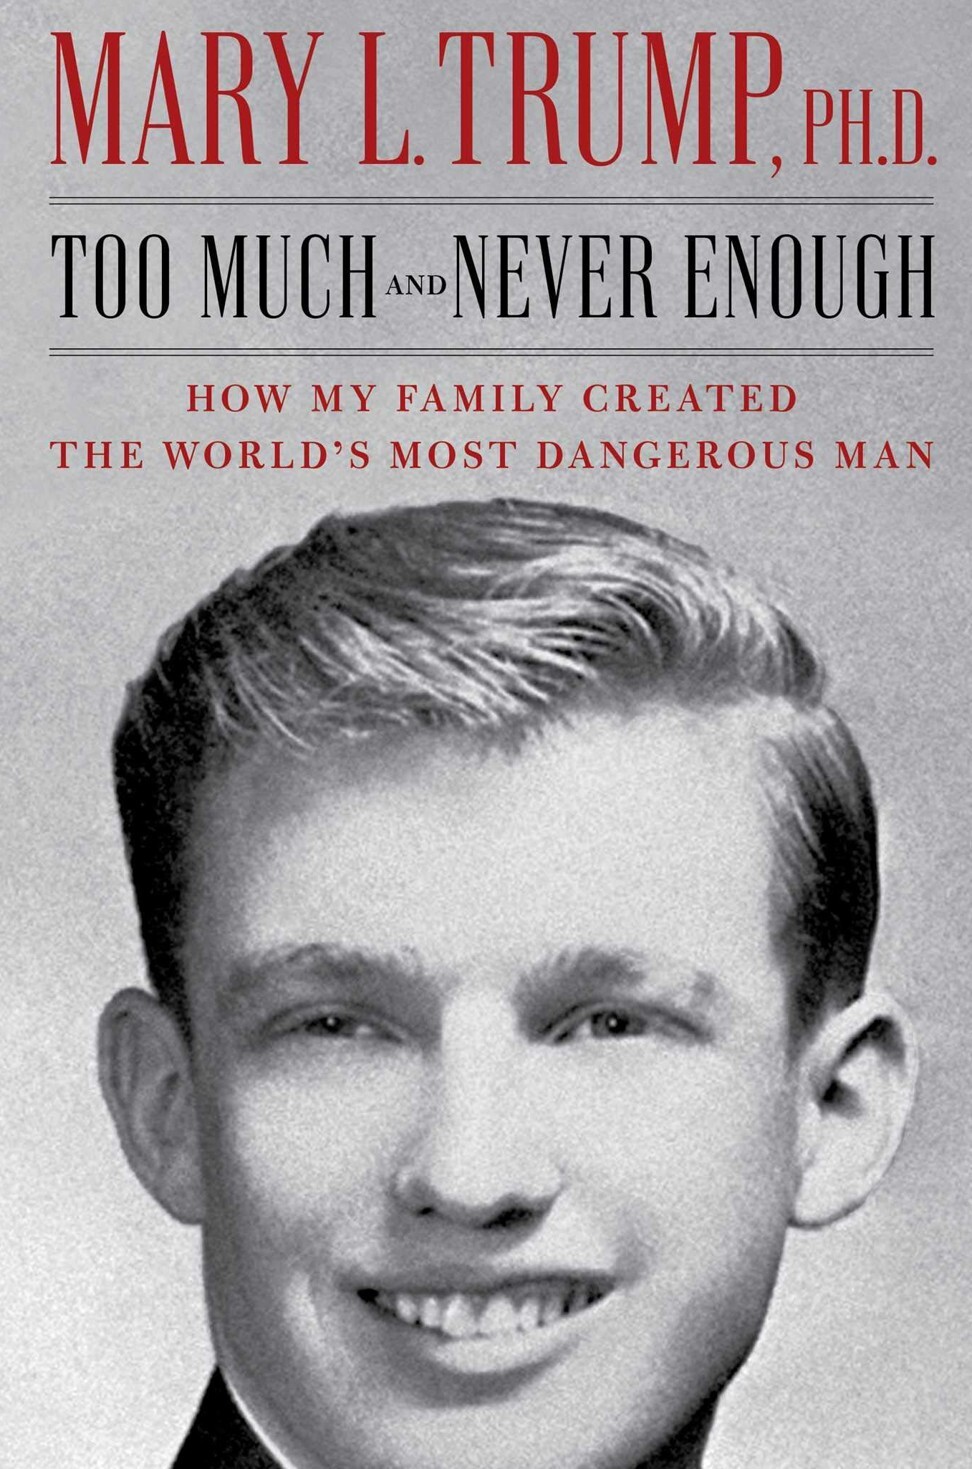 The cover of Mary Trump’s book.